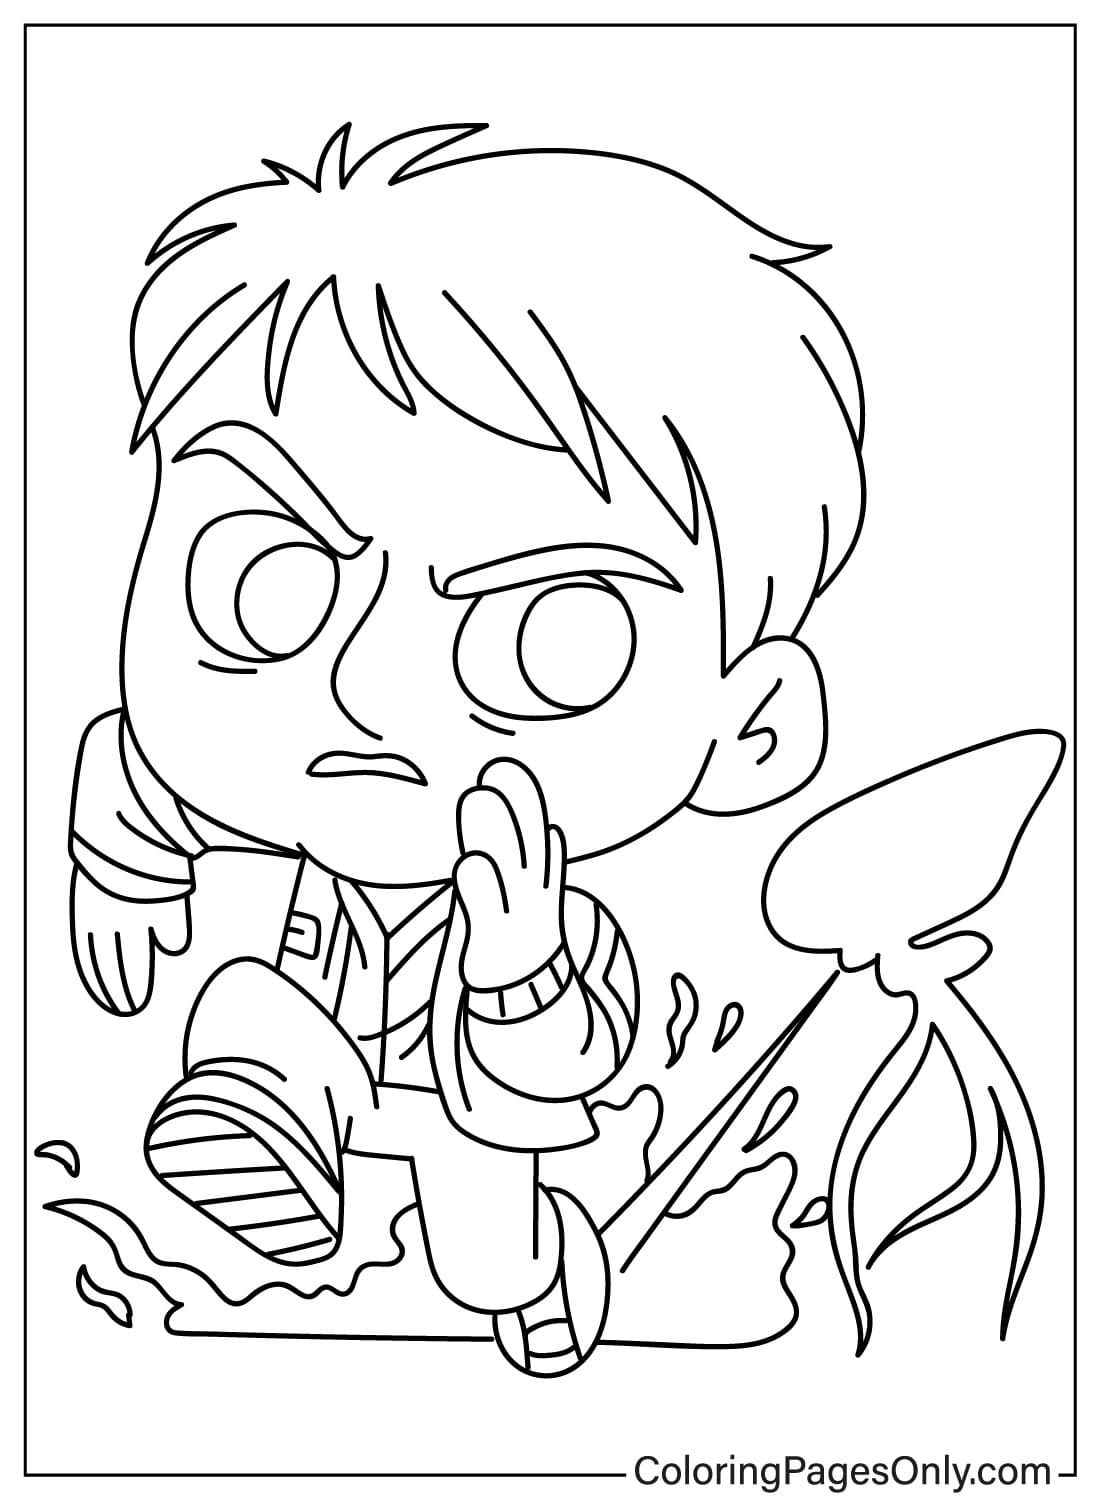 Chibi Tom Cruise Coloring Page from Tom Cruise